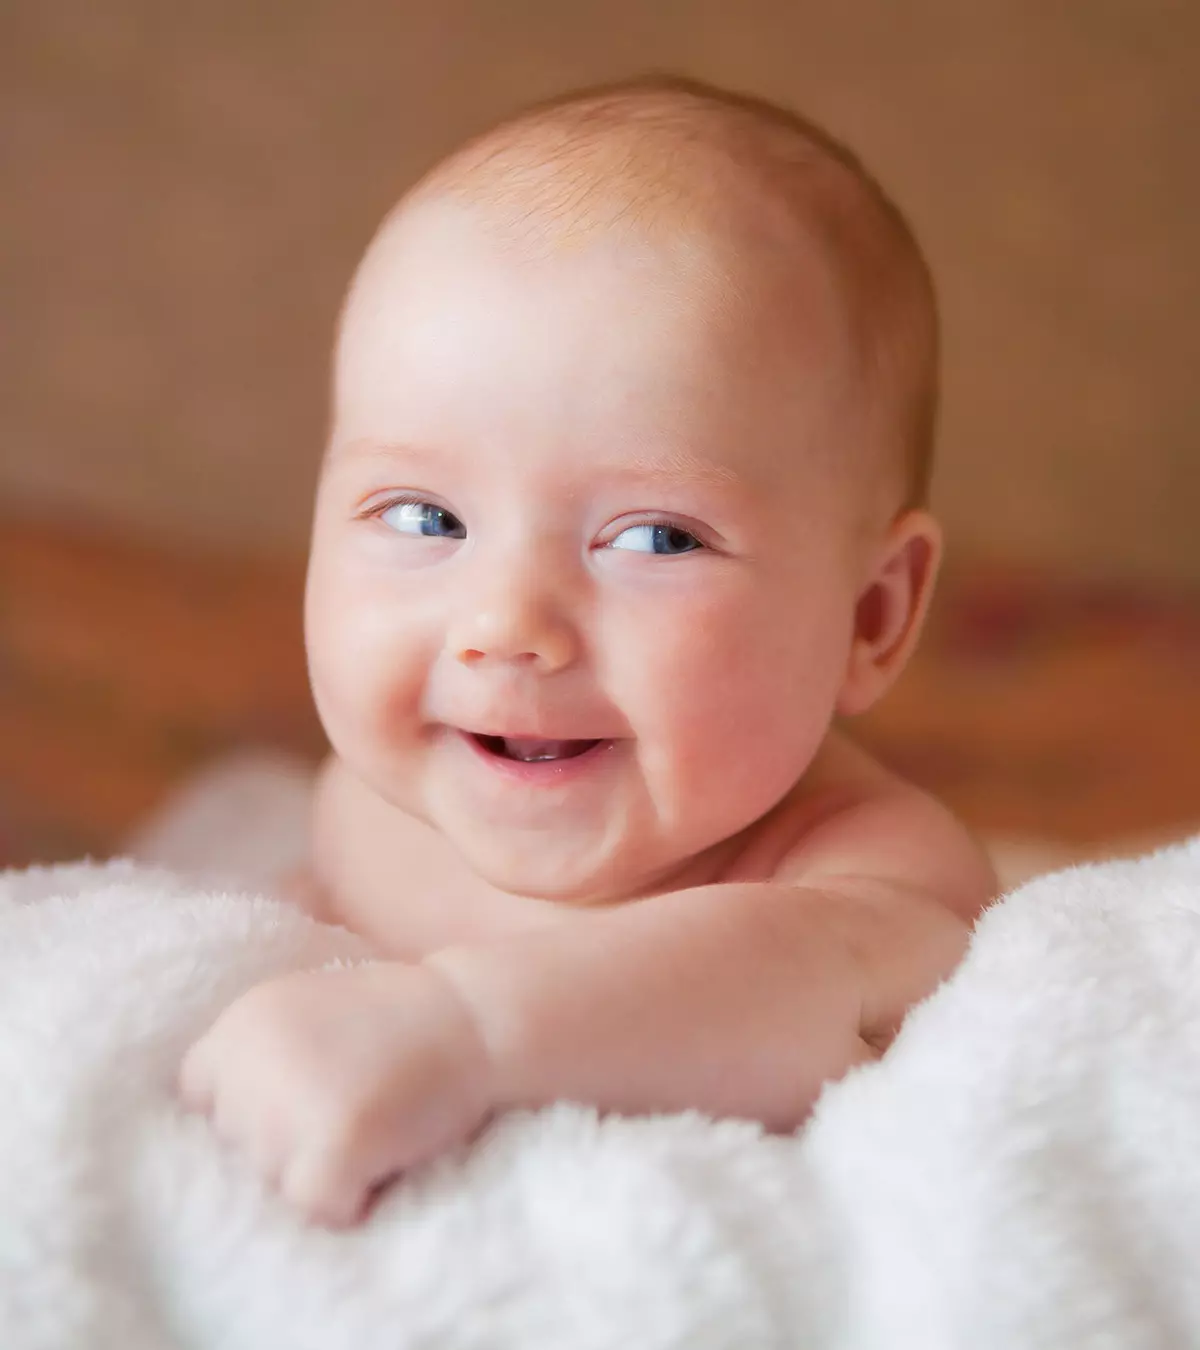 28 Truly Amazing Facts About Babies